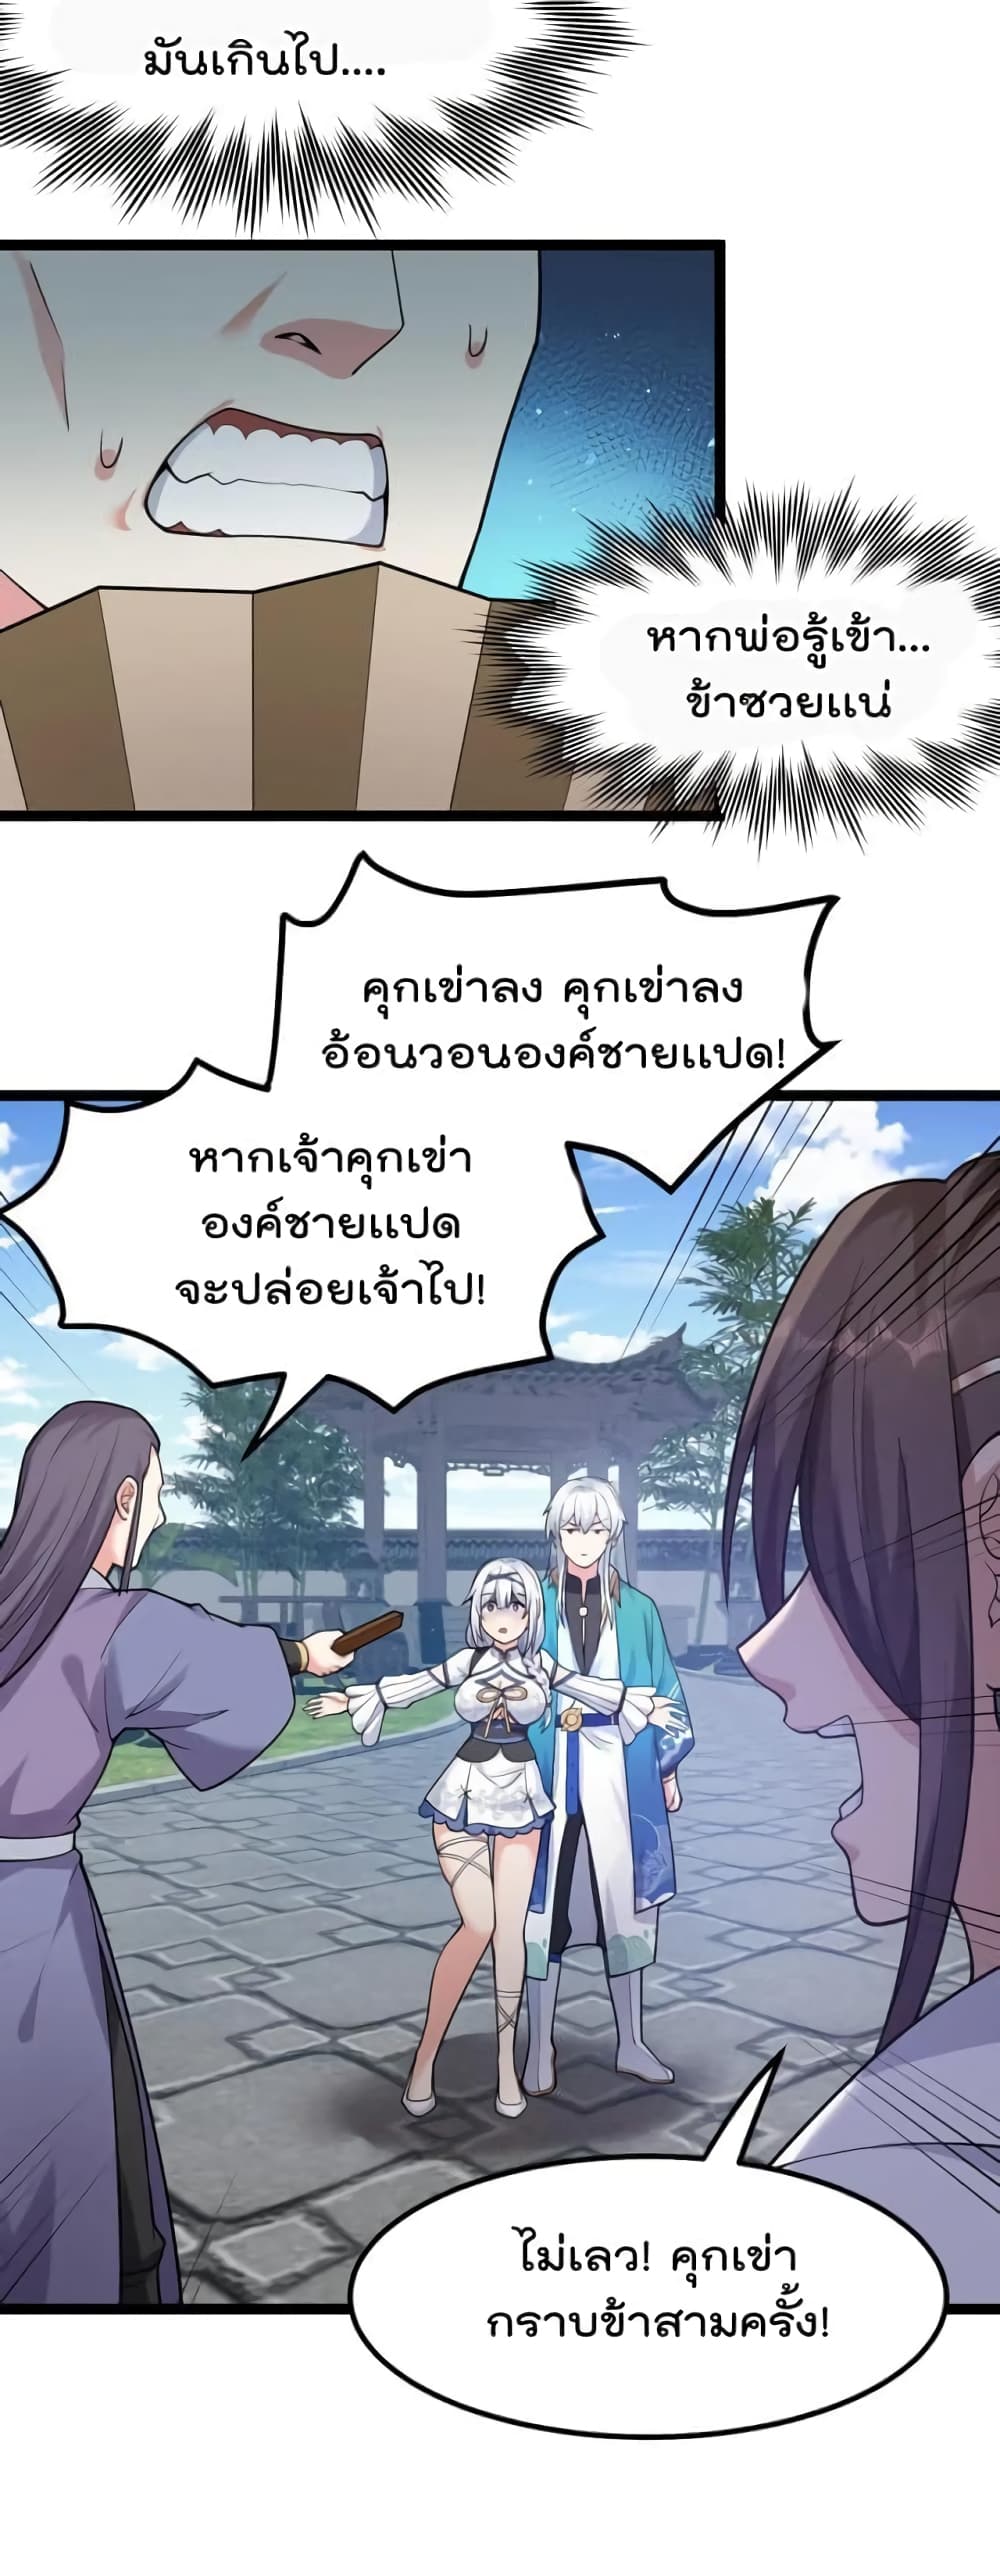 Godsian Masian from Another World ตอนที่ 114 (29)